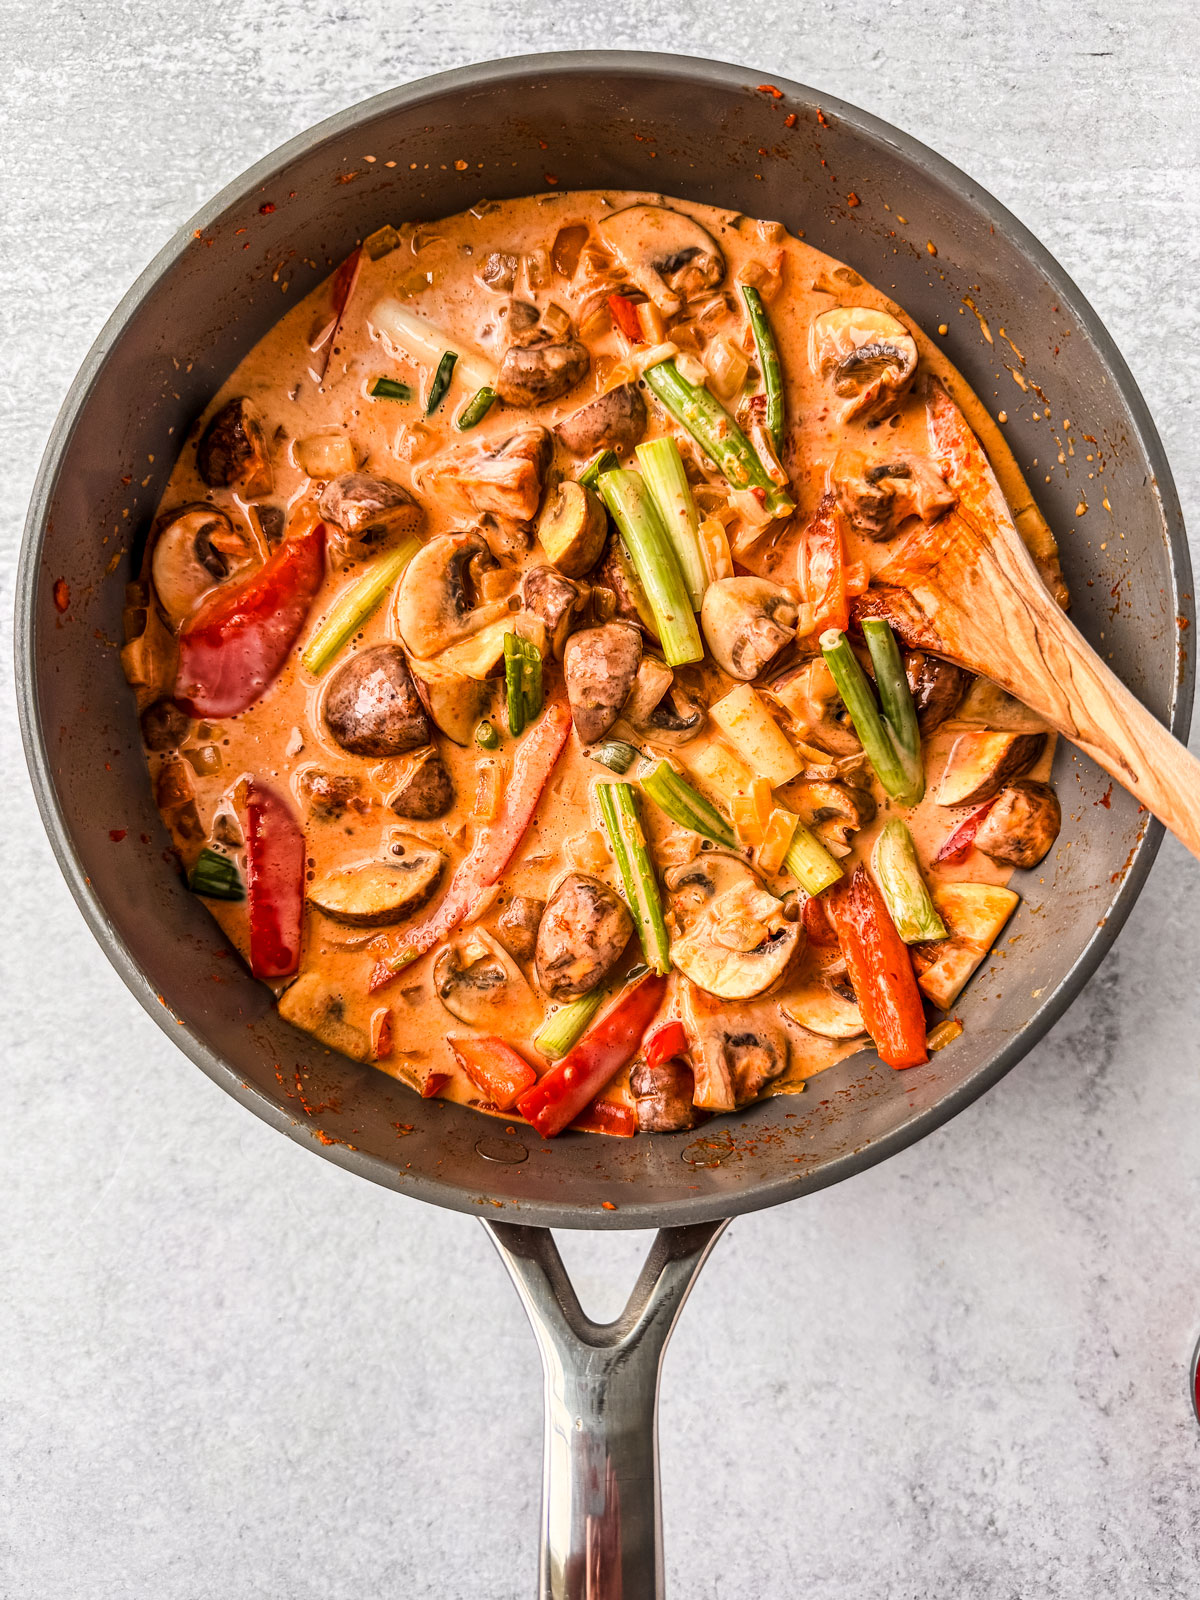 Creamy coconut curry with vegetables well mixed in a pan.